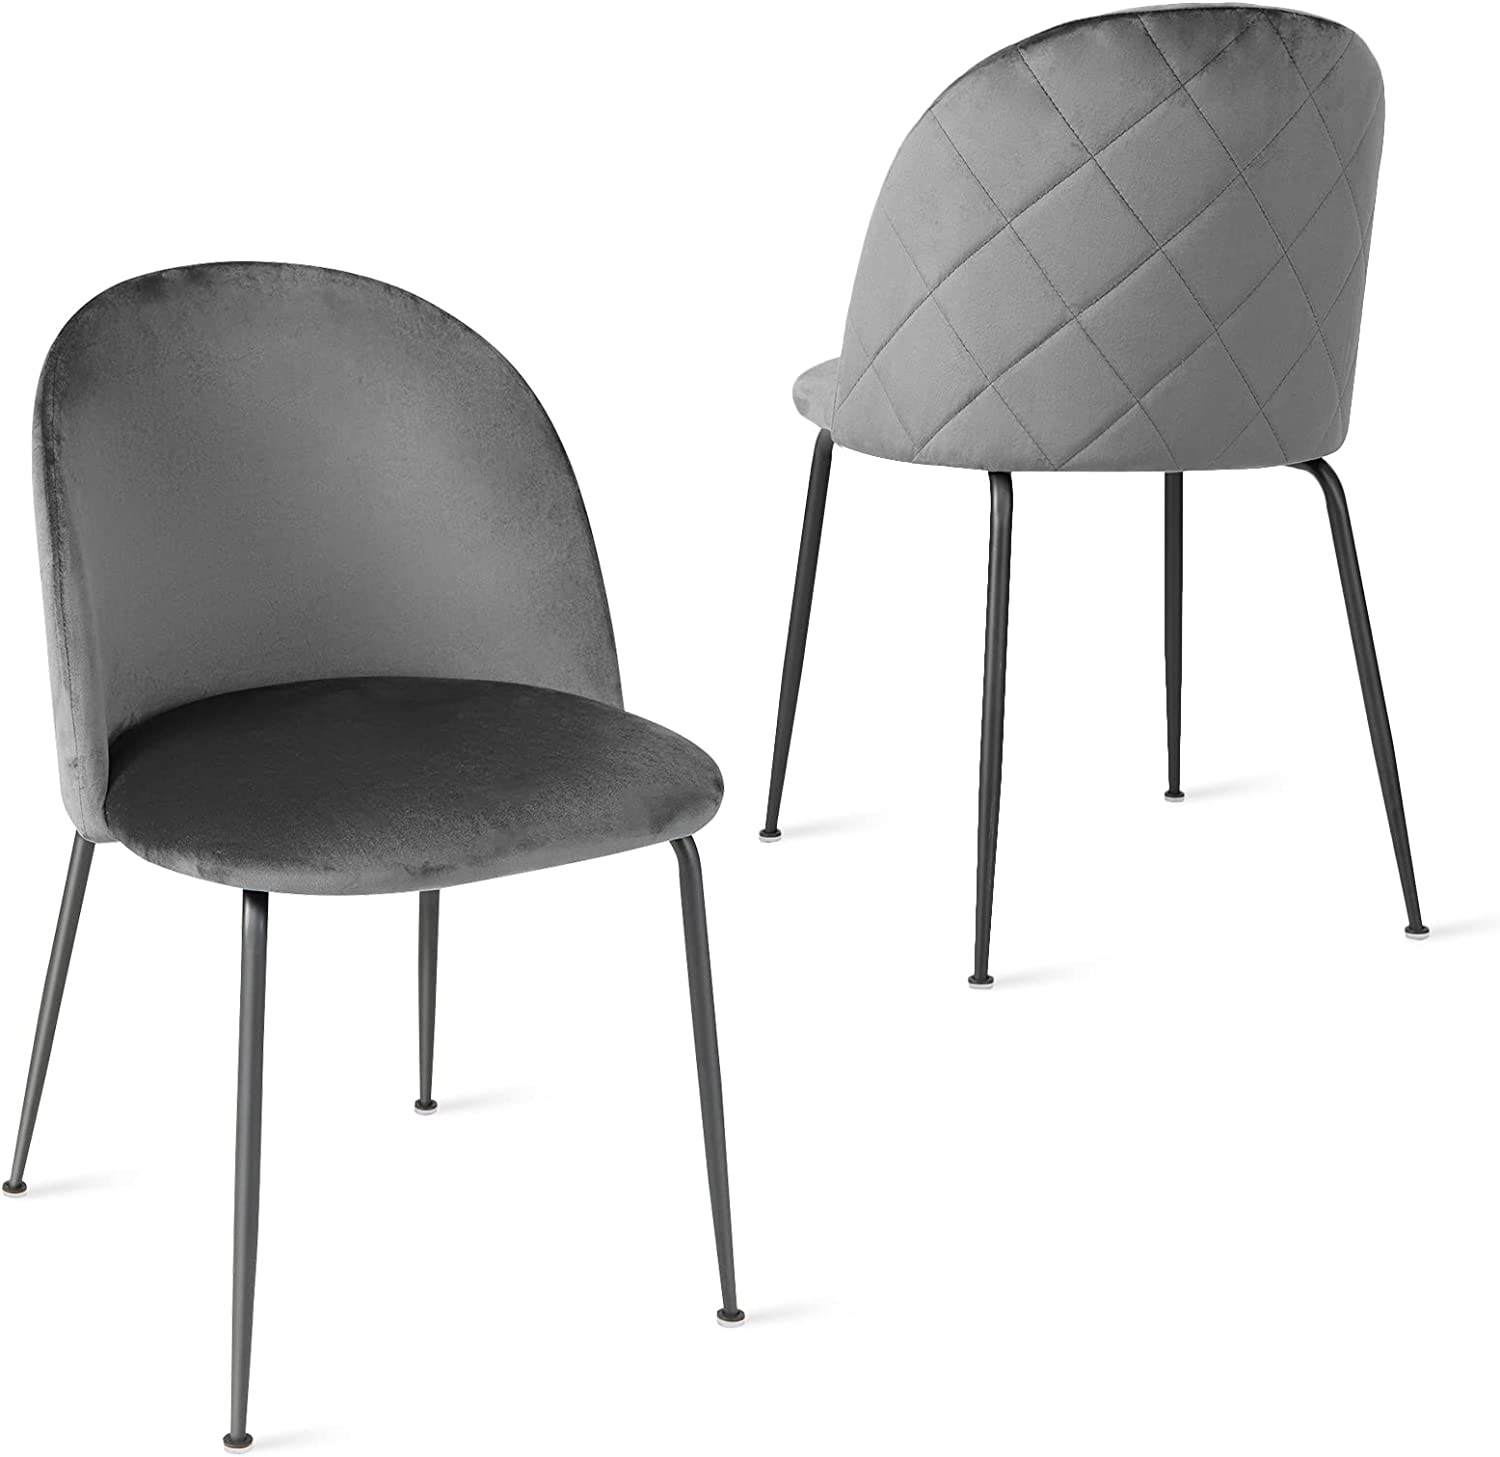 Giantex Modern Velvet Dining Chairs Set of 2 / 4 - Comfy Vanity Desk Chair, Classic Upholstered Dining Room Chairs